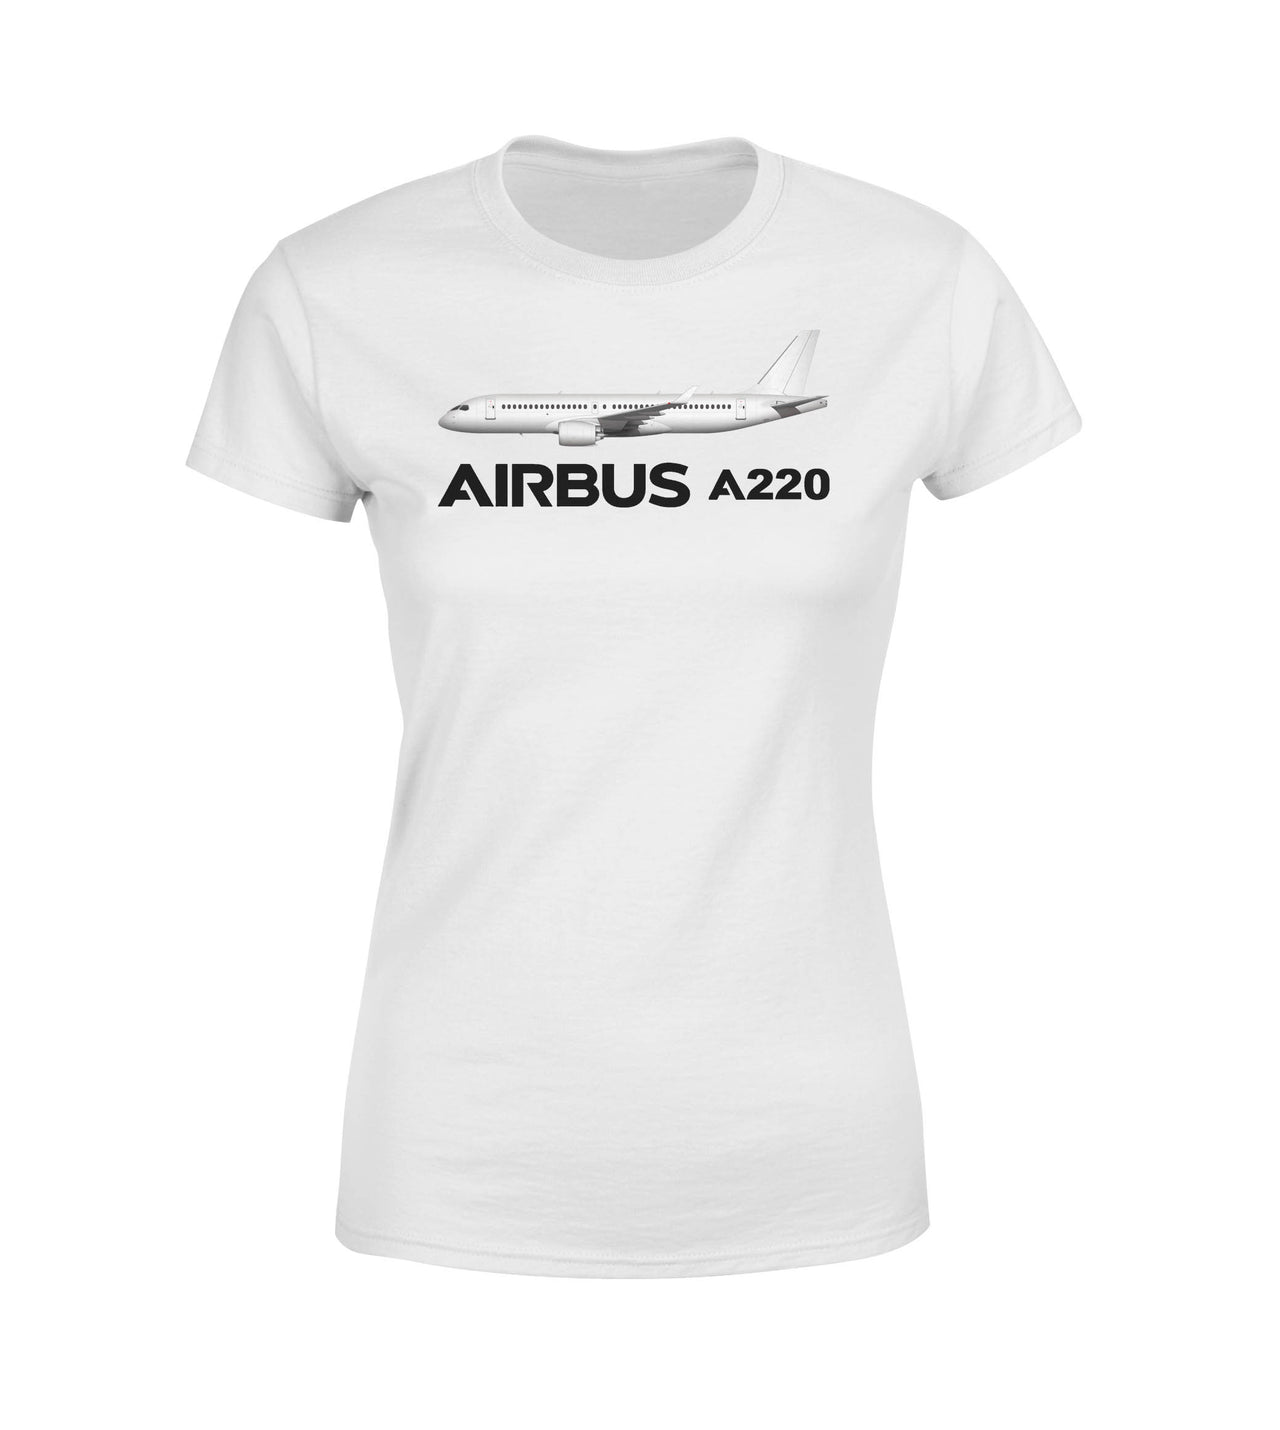 The Airbus A220 Designed Women T-Shirts